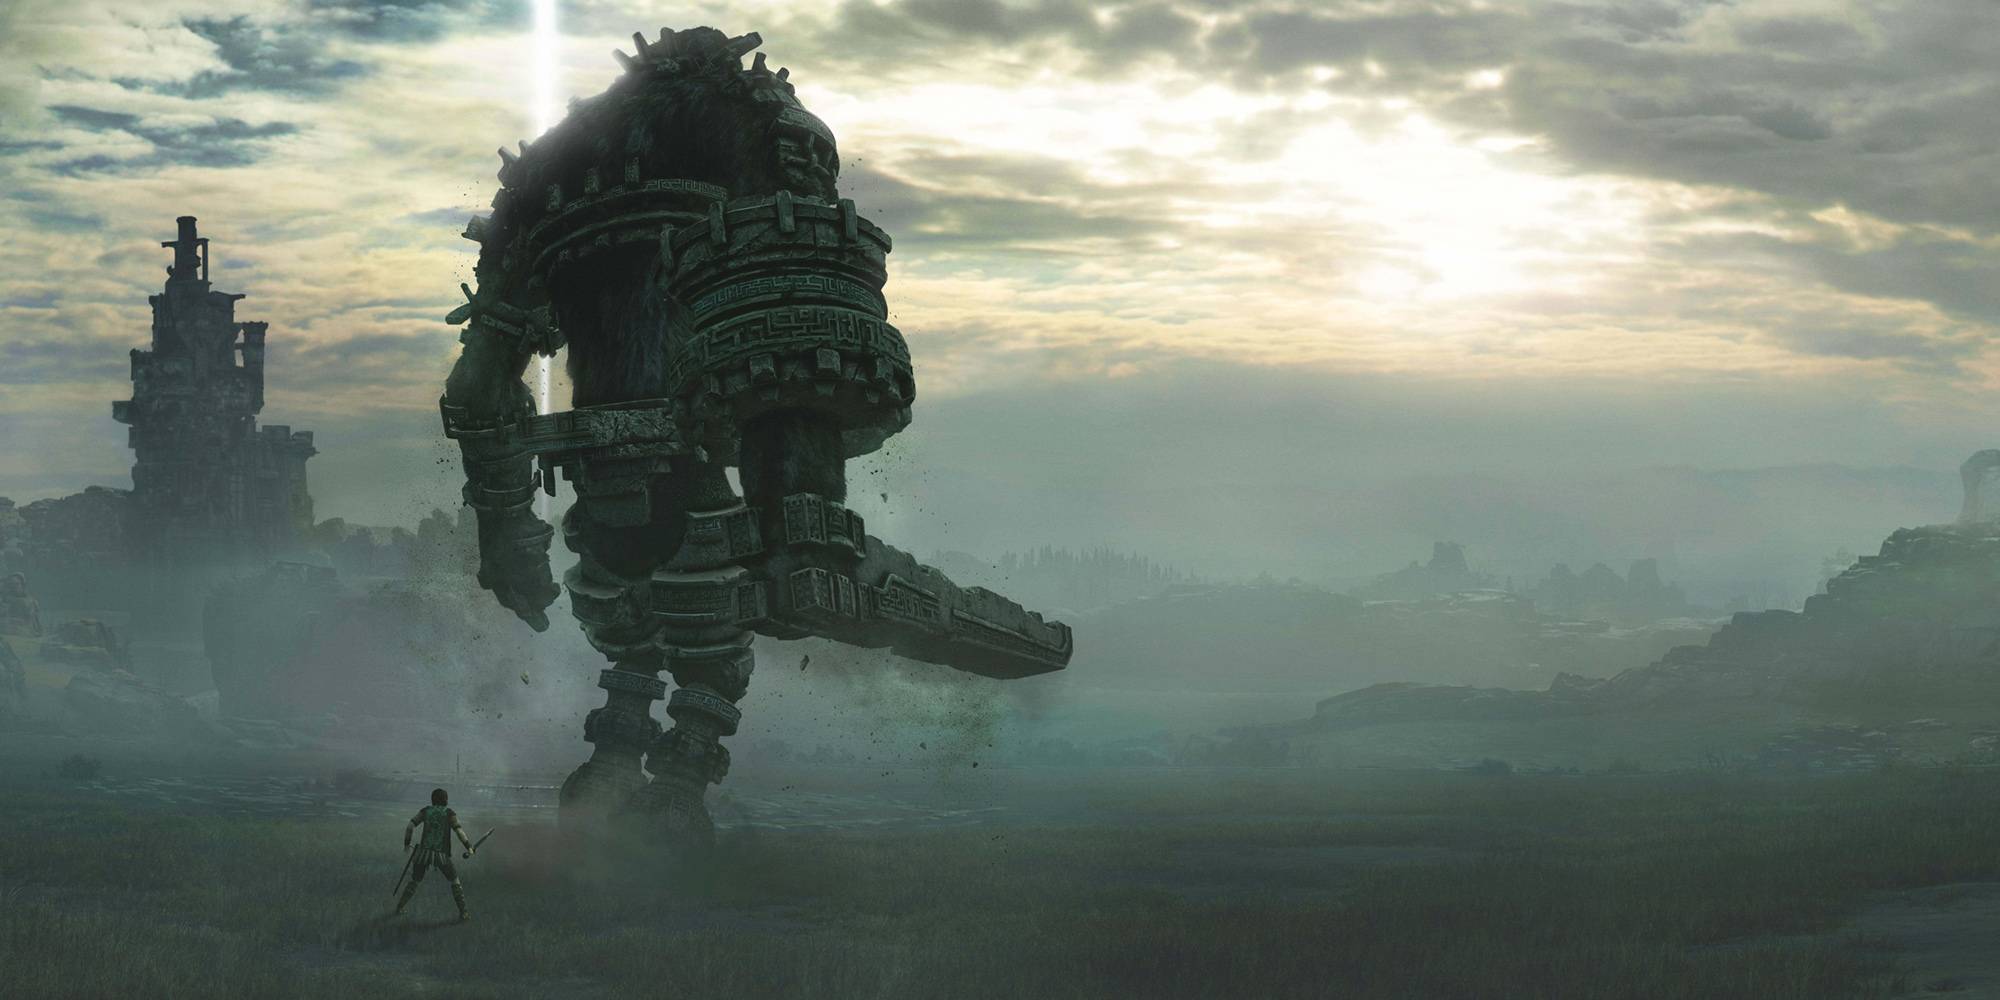 Wander-Eyeing-Up-One-Of-The-Colossi-In-The-Remake-Of-Shadow-Of-The-Colossus.jpg